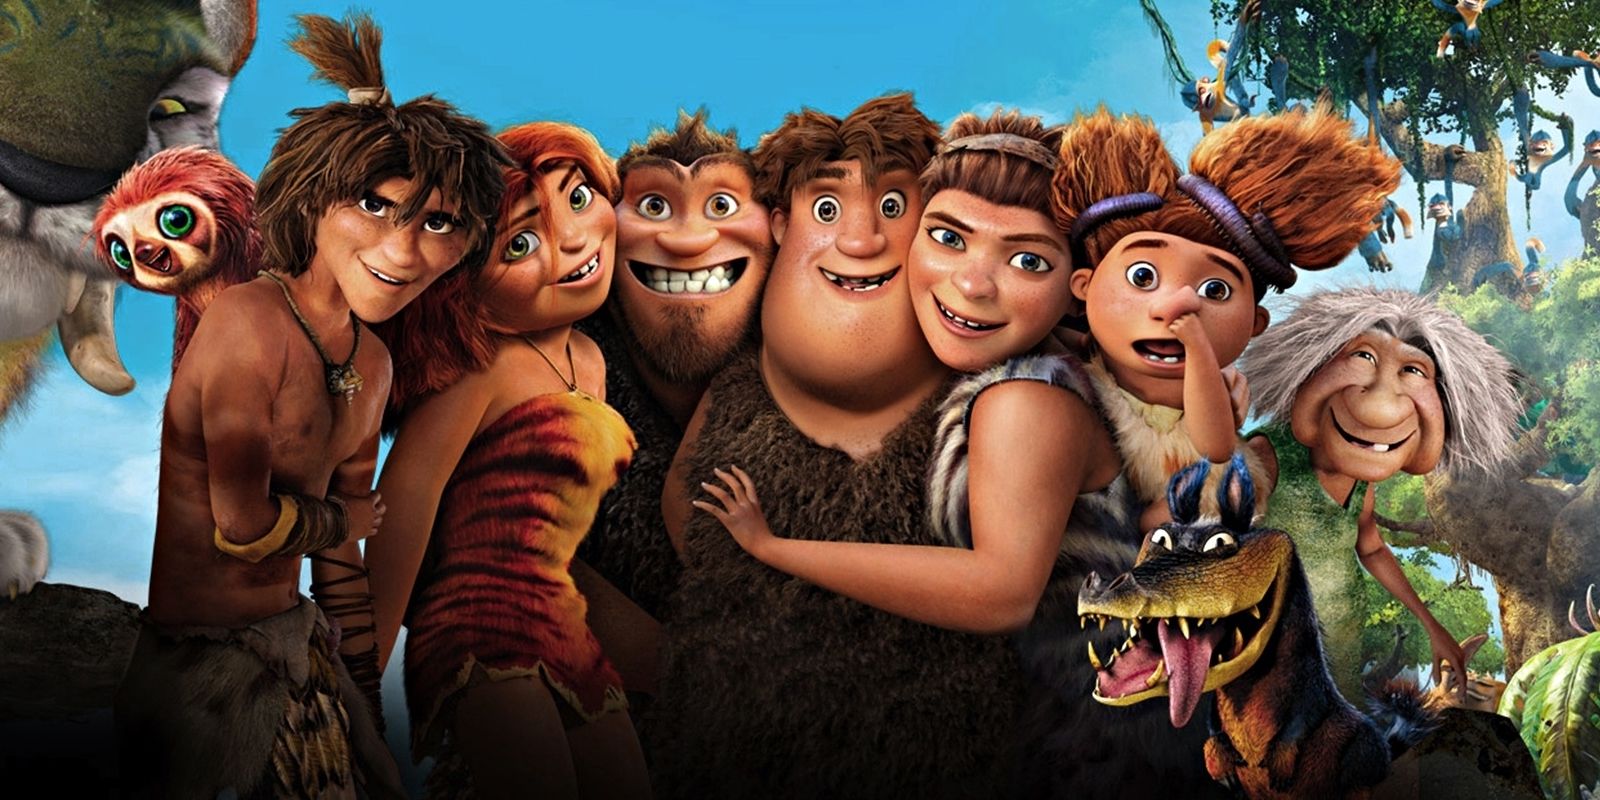 The cast of Dreamworks The Croods